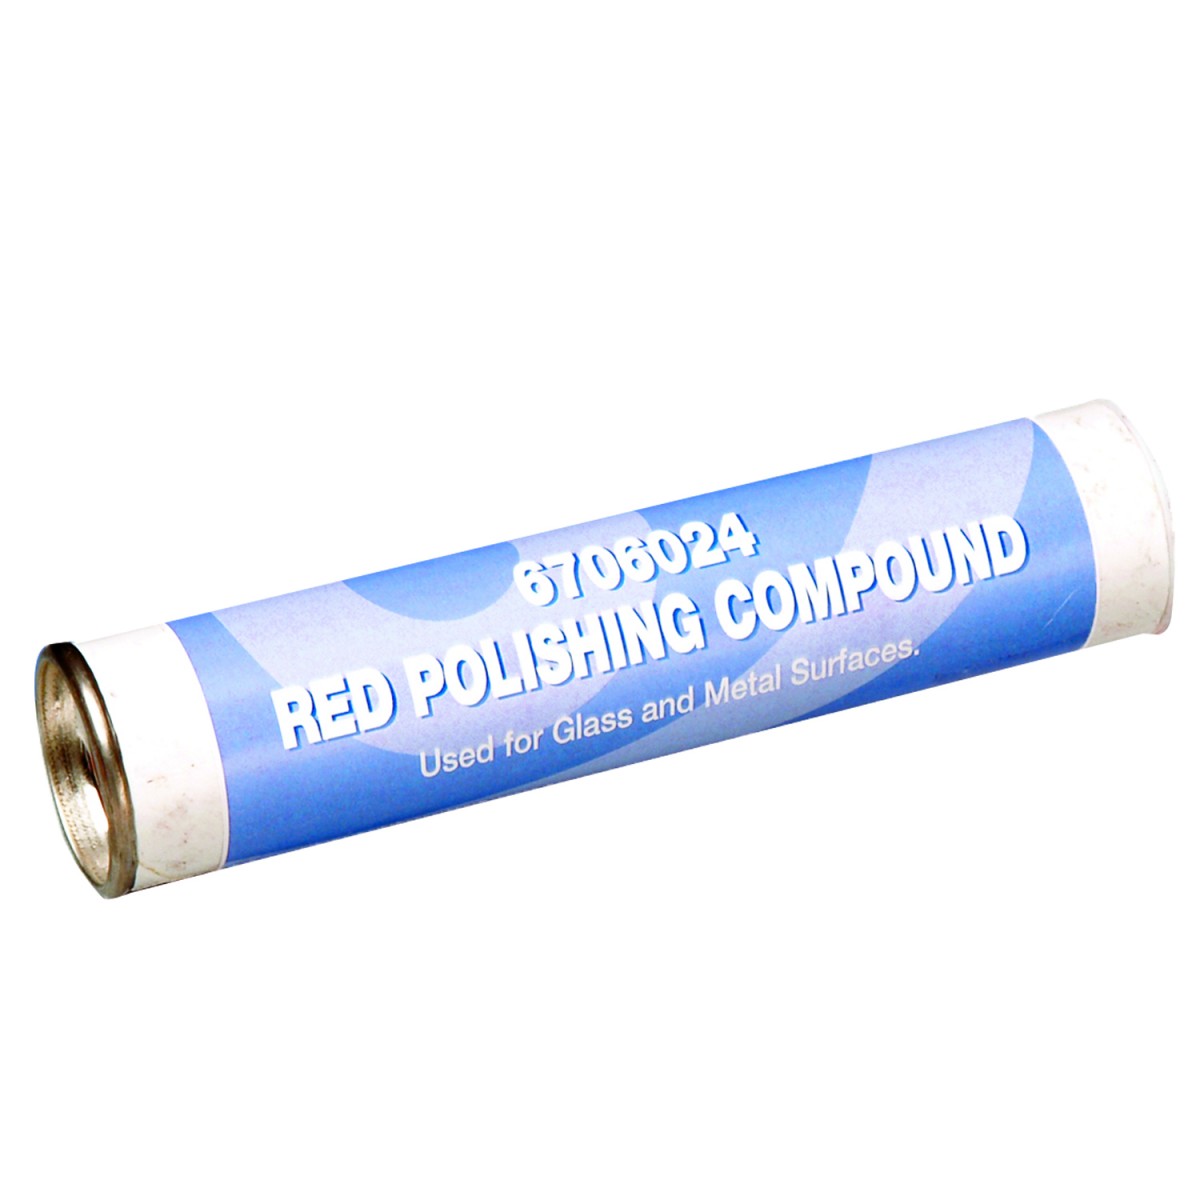 Red Rouge Polishing Compound